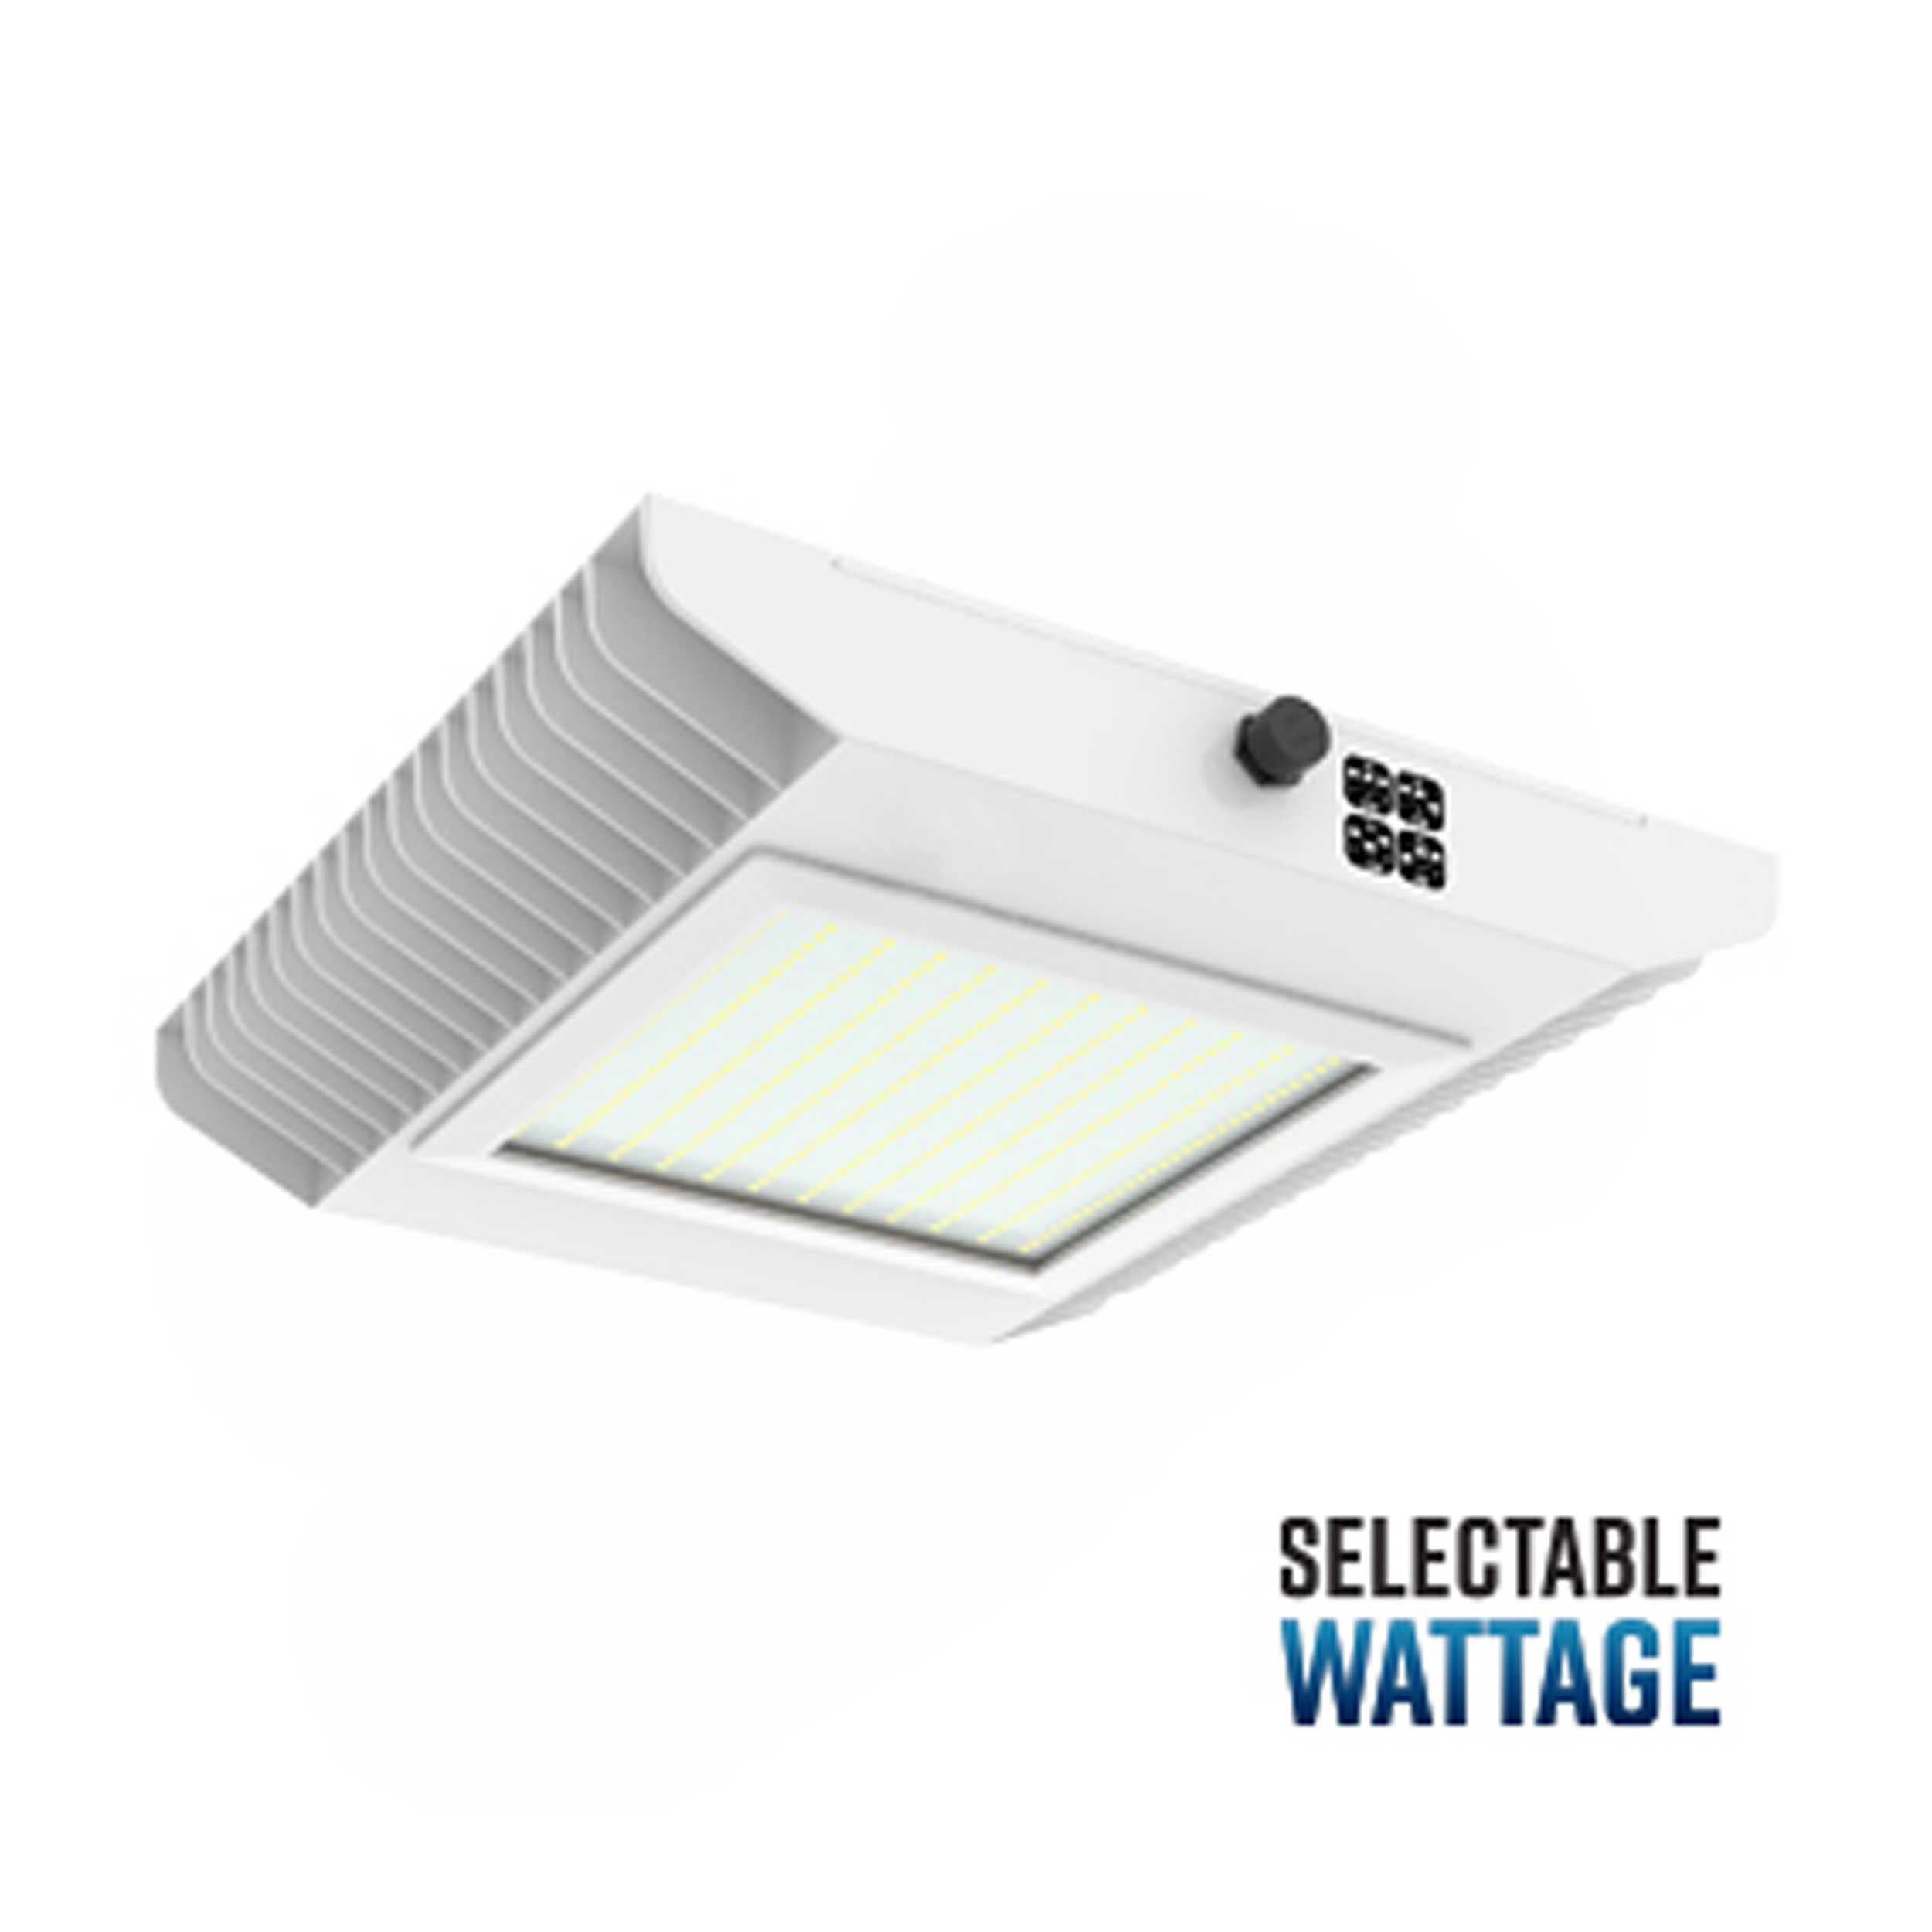 LED Canopy Light, 80W-150W, Selectable Wattage, 22650 Lumens